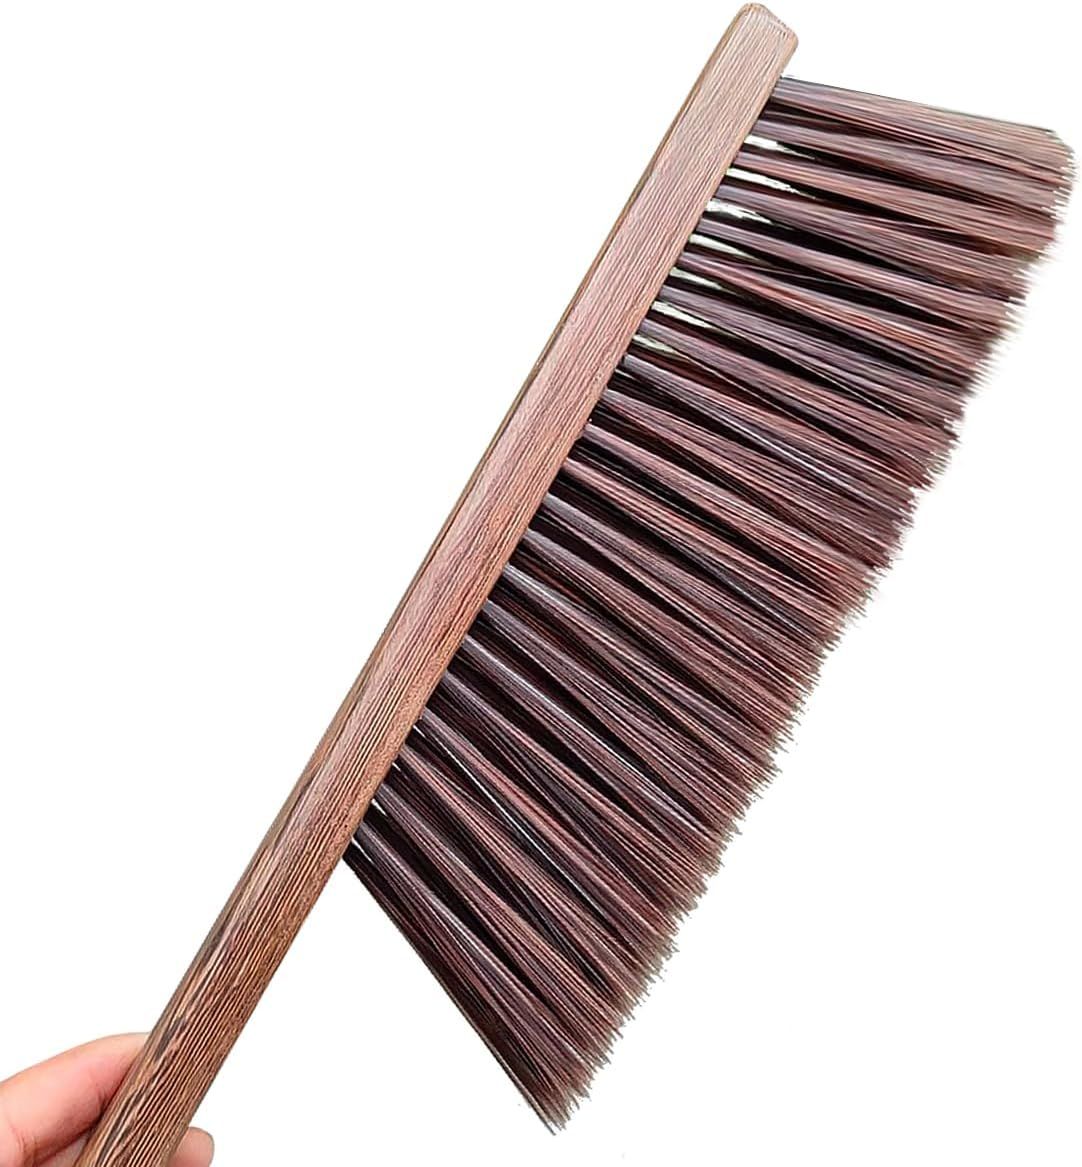 Hand Broom Brush,Natural Wooden Handle Soft Bristles Dusting Cleaning Brush,Light and Sturdy for ... | Amazon (US)